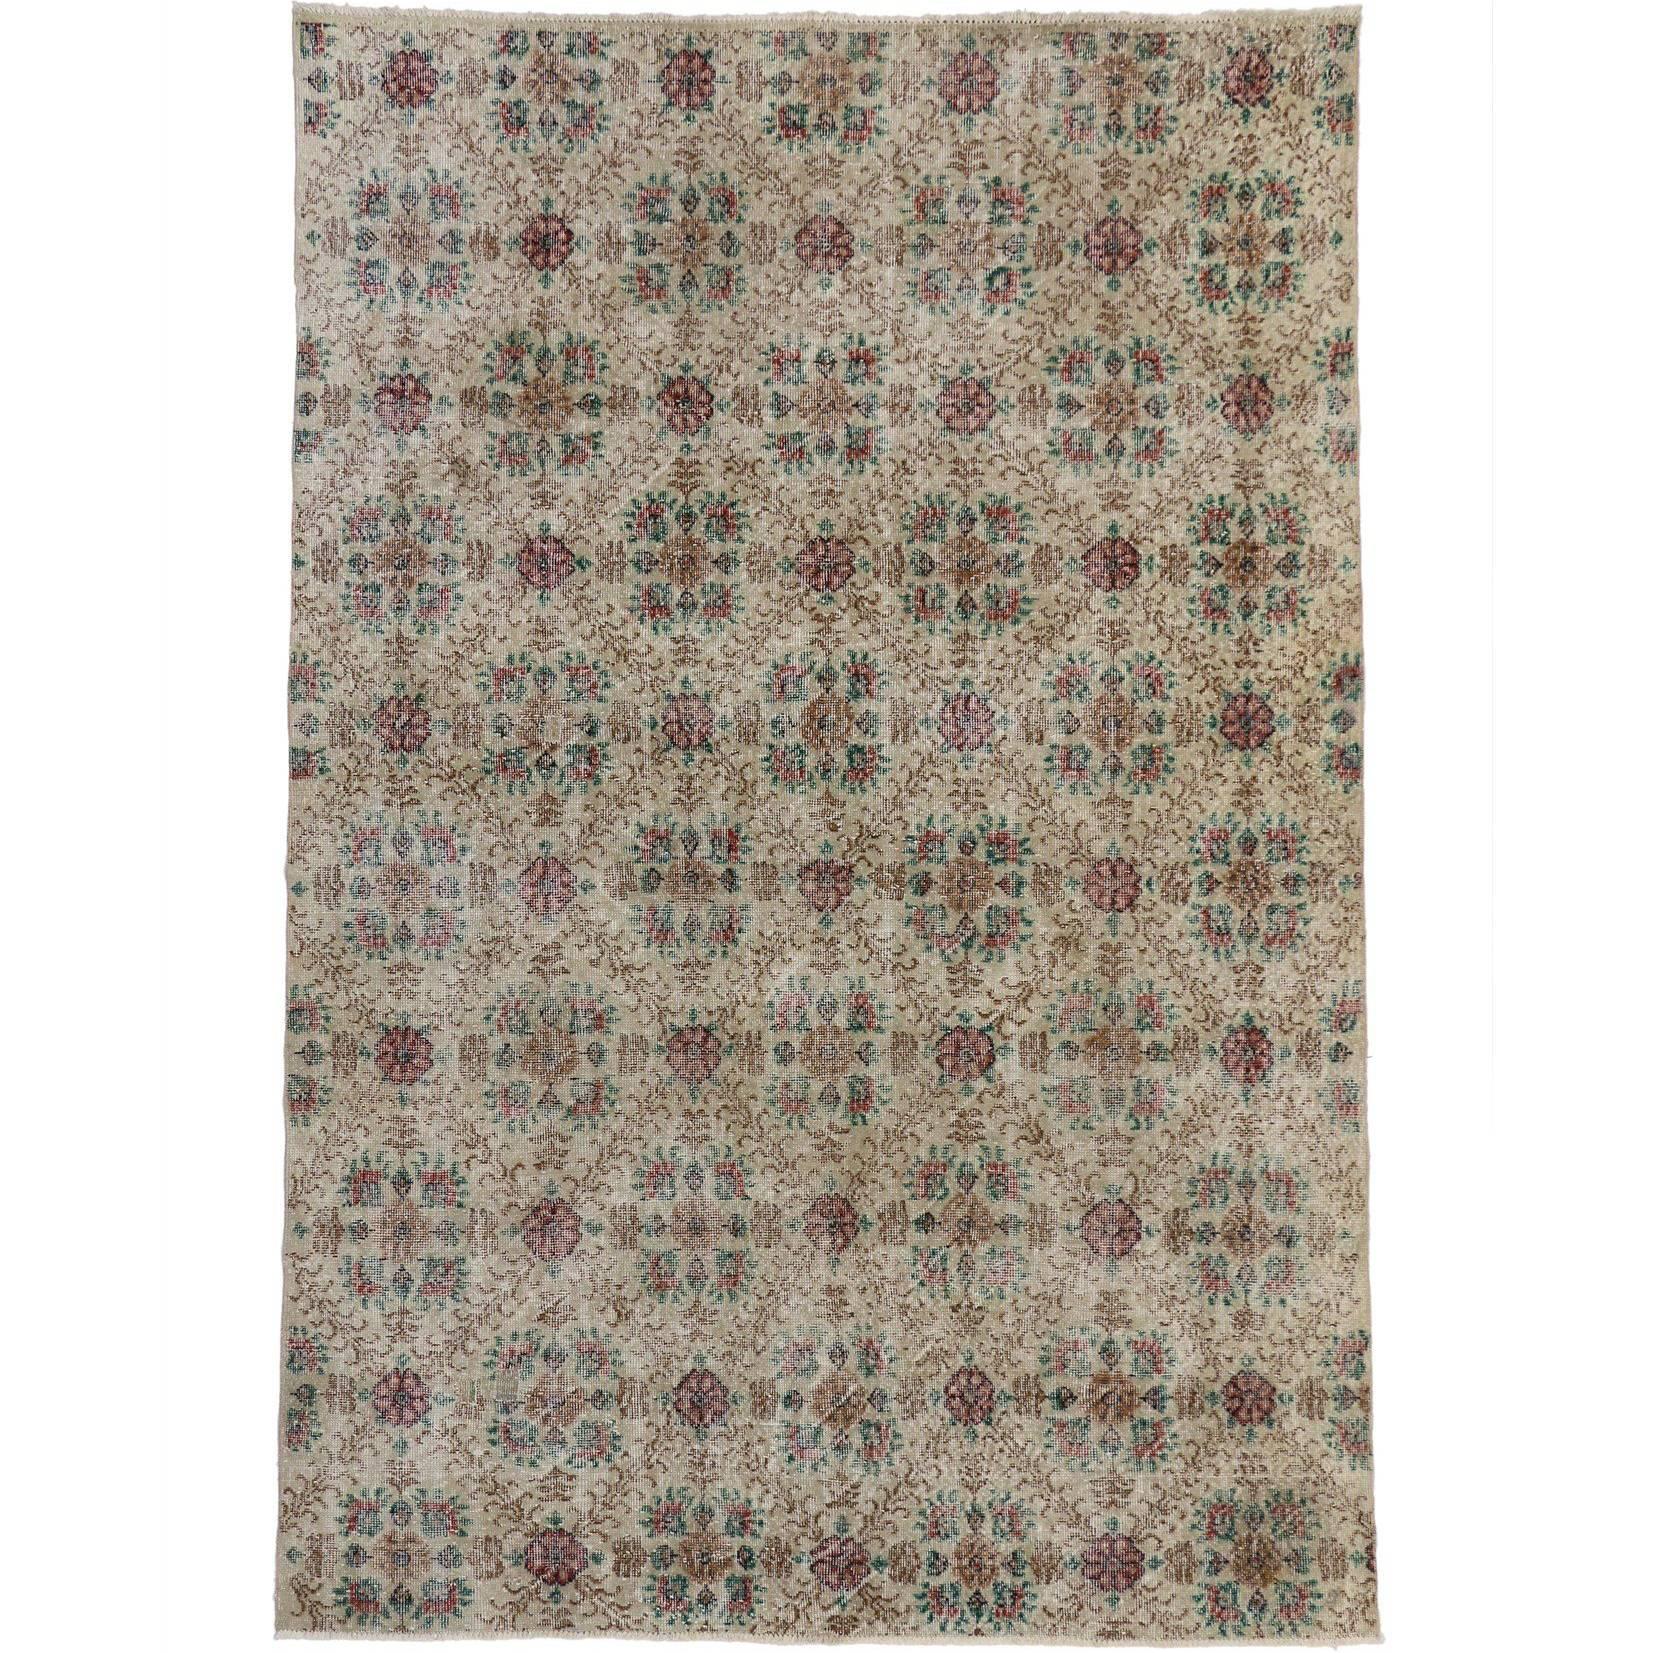 Distressed Vintage Turkish Sivas Rug with Romantic English Cottage Style For Sale